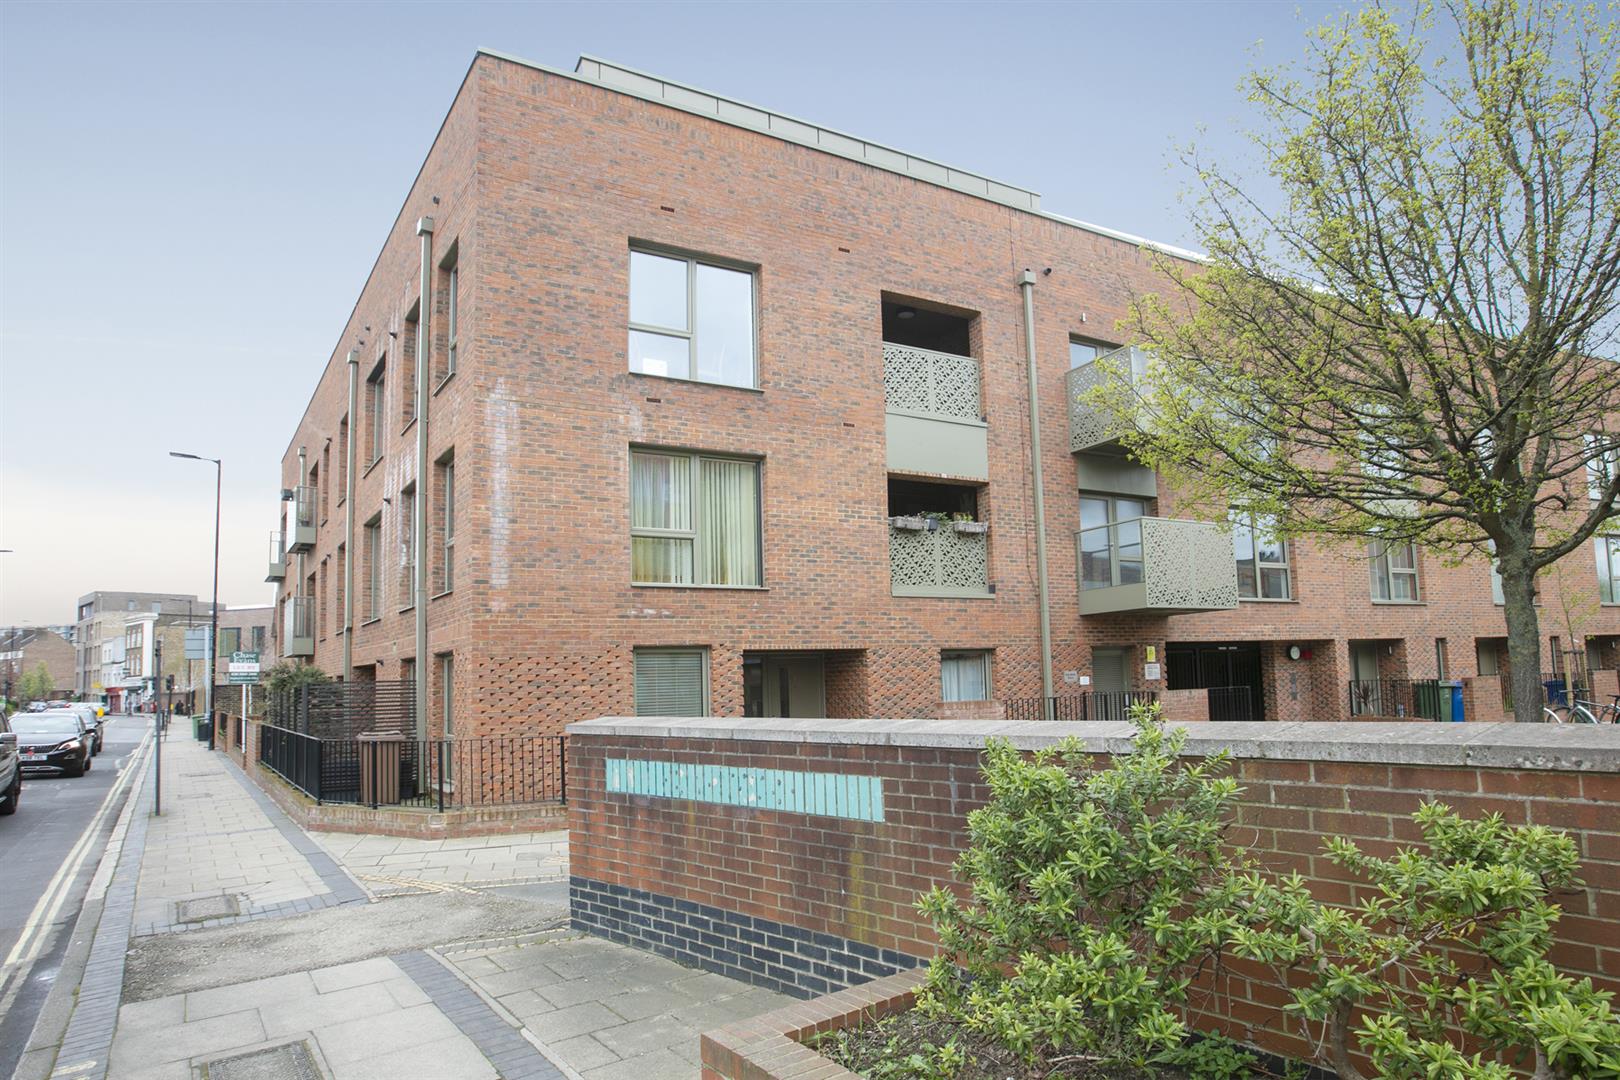 Flat - Purpose Built For Sale in Benhill Road, Camberwell, SE5 928 view13